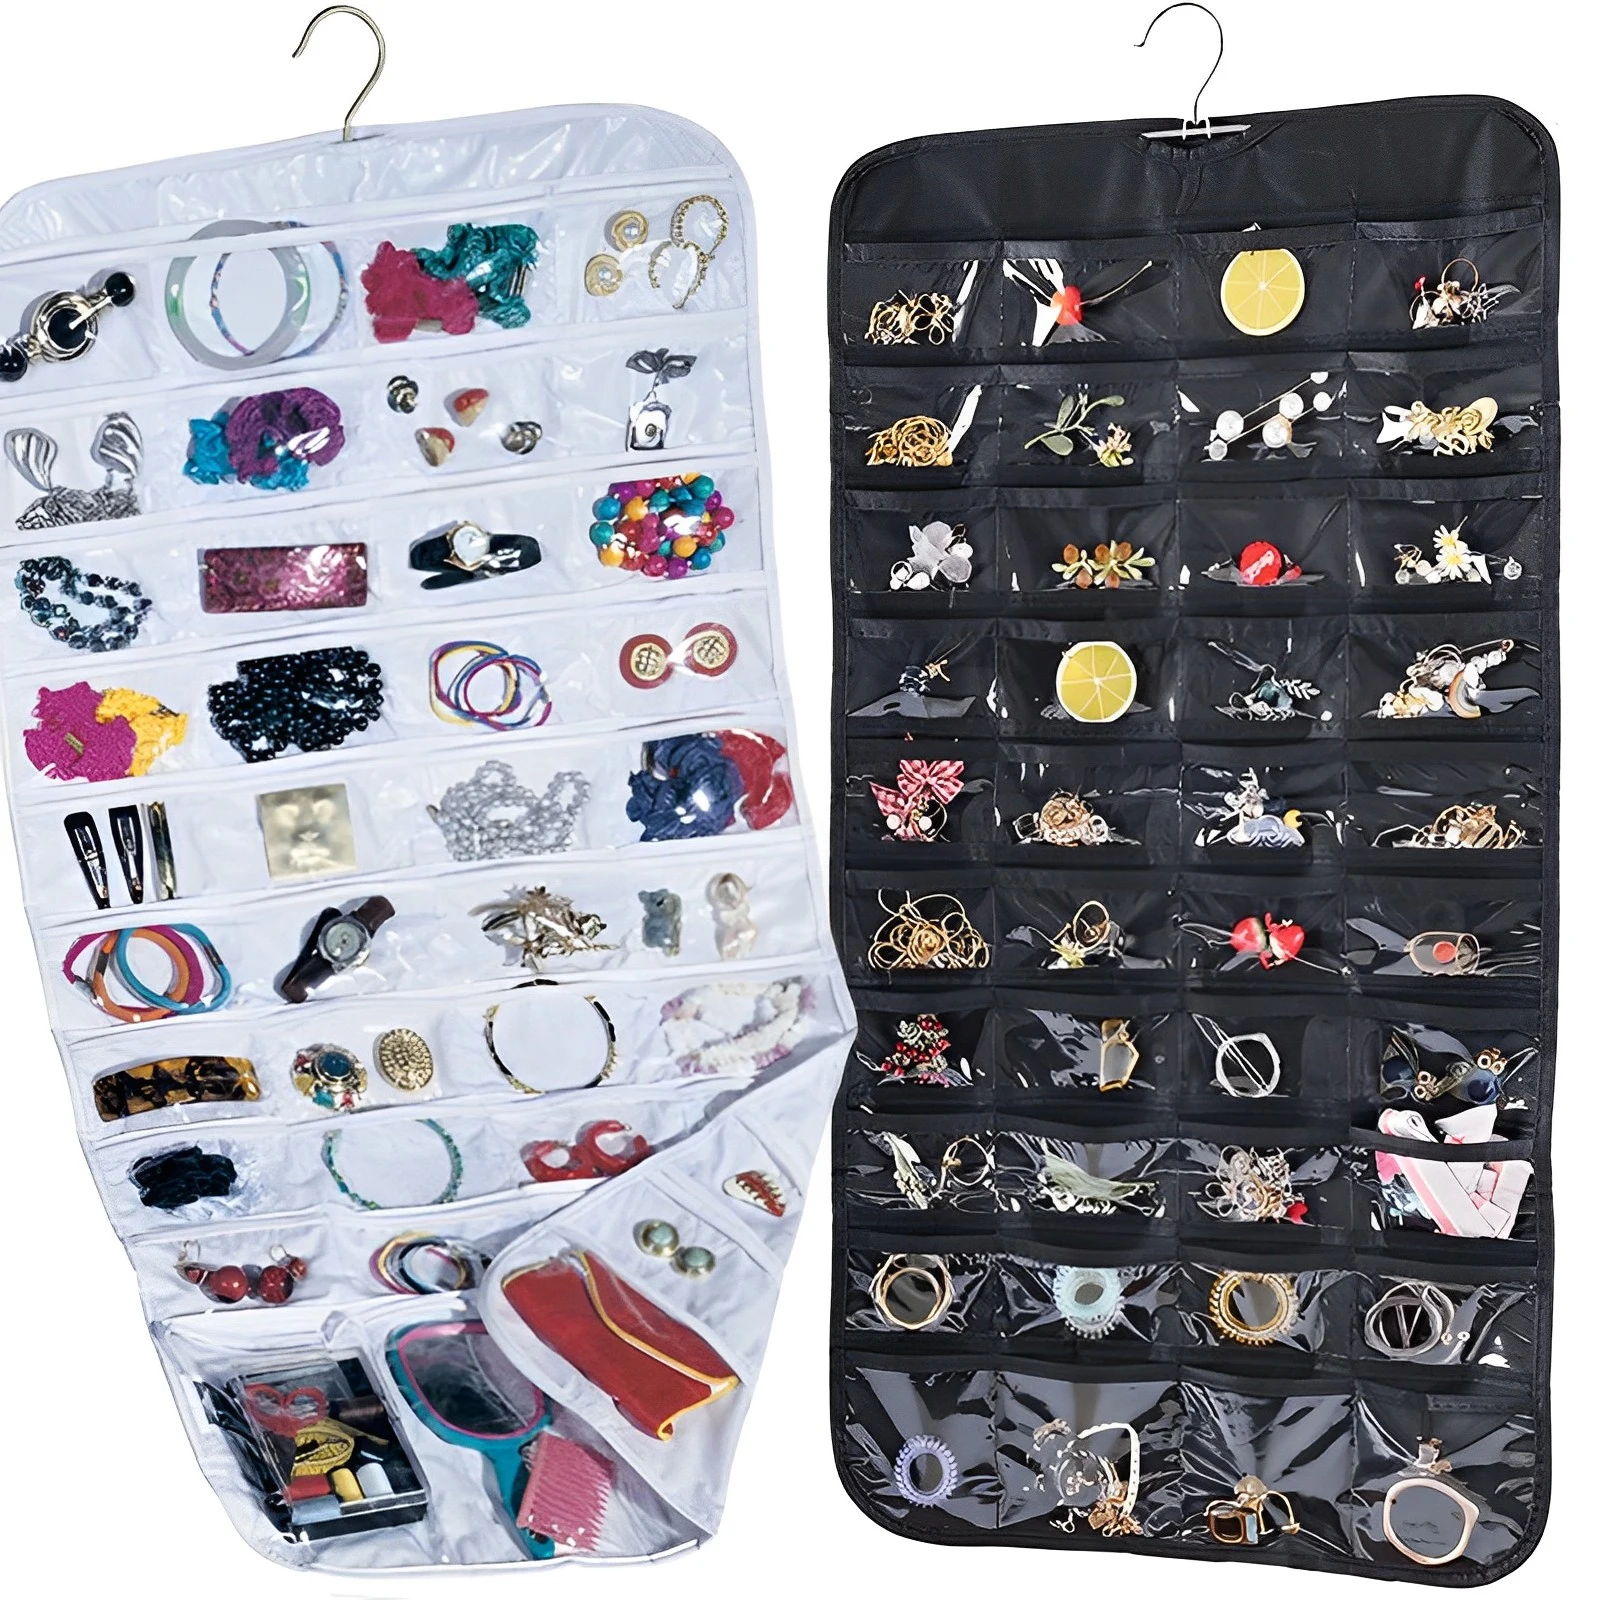 

80 Grids Storage Bag Double-sided Jewelry Ornaments Organizers Hanging Sorting Earrings Ring Necklace Dustproof Storage Box